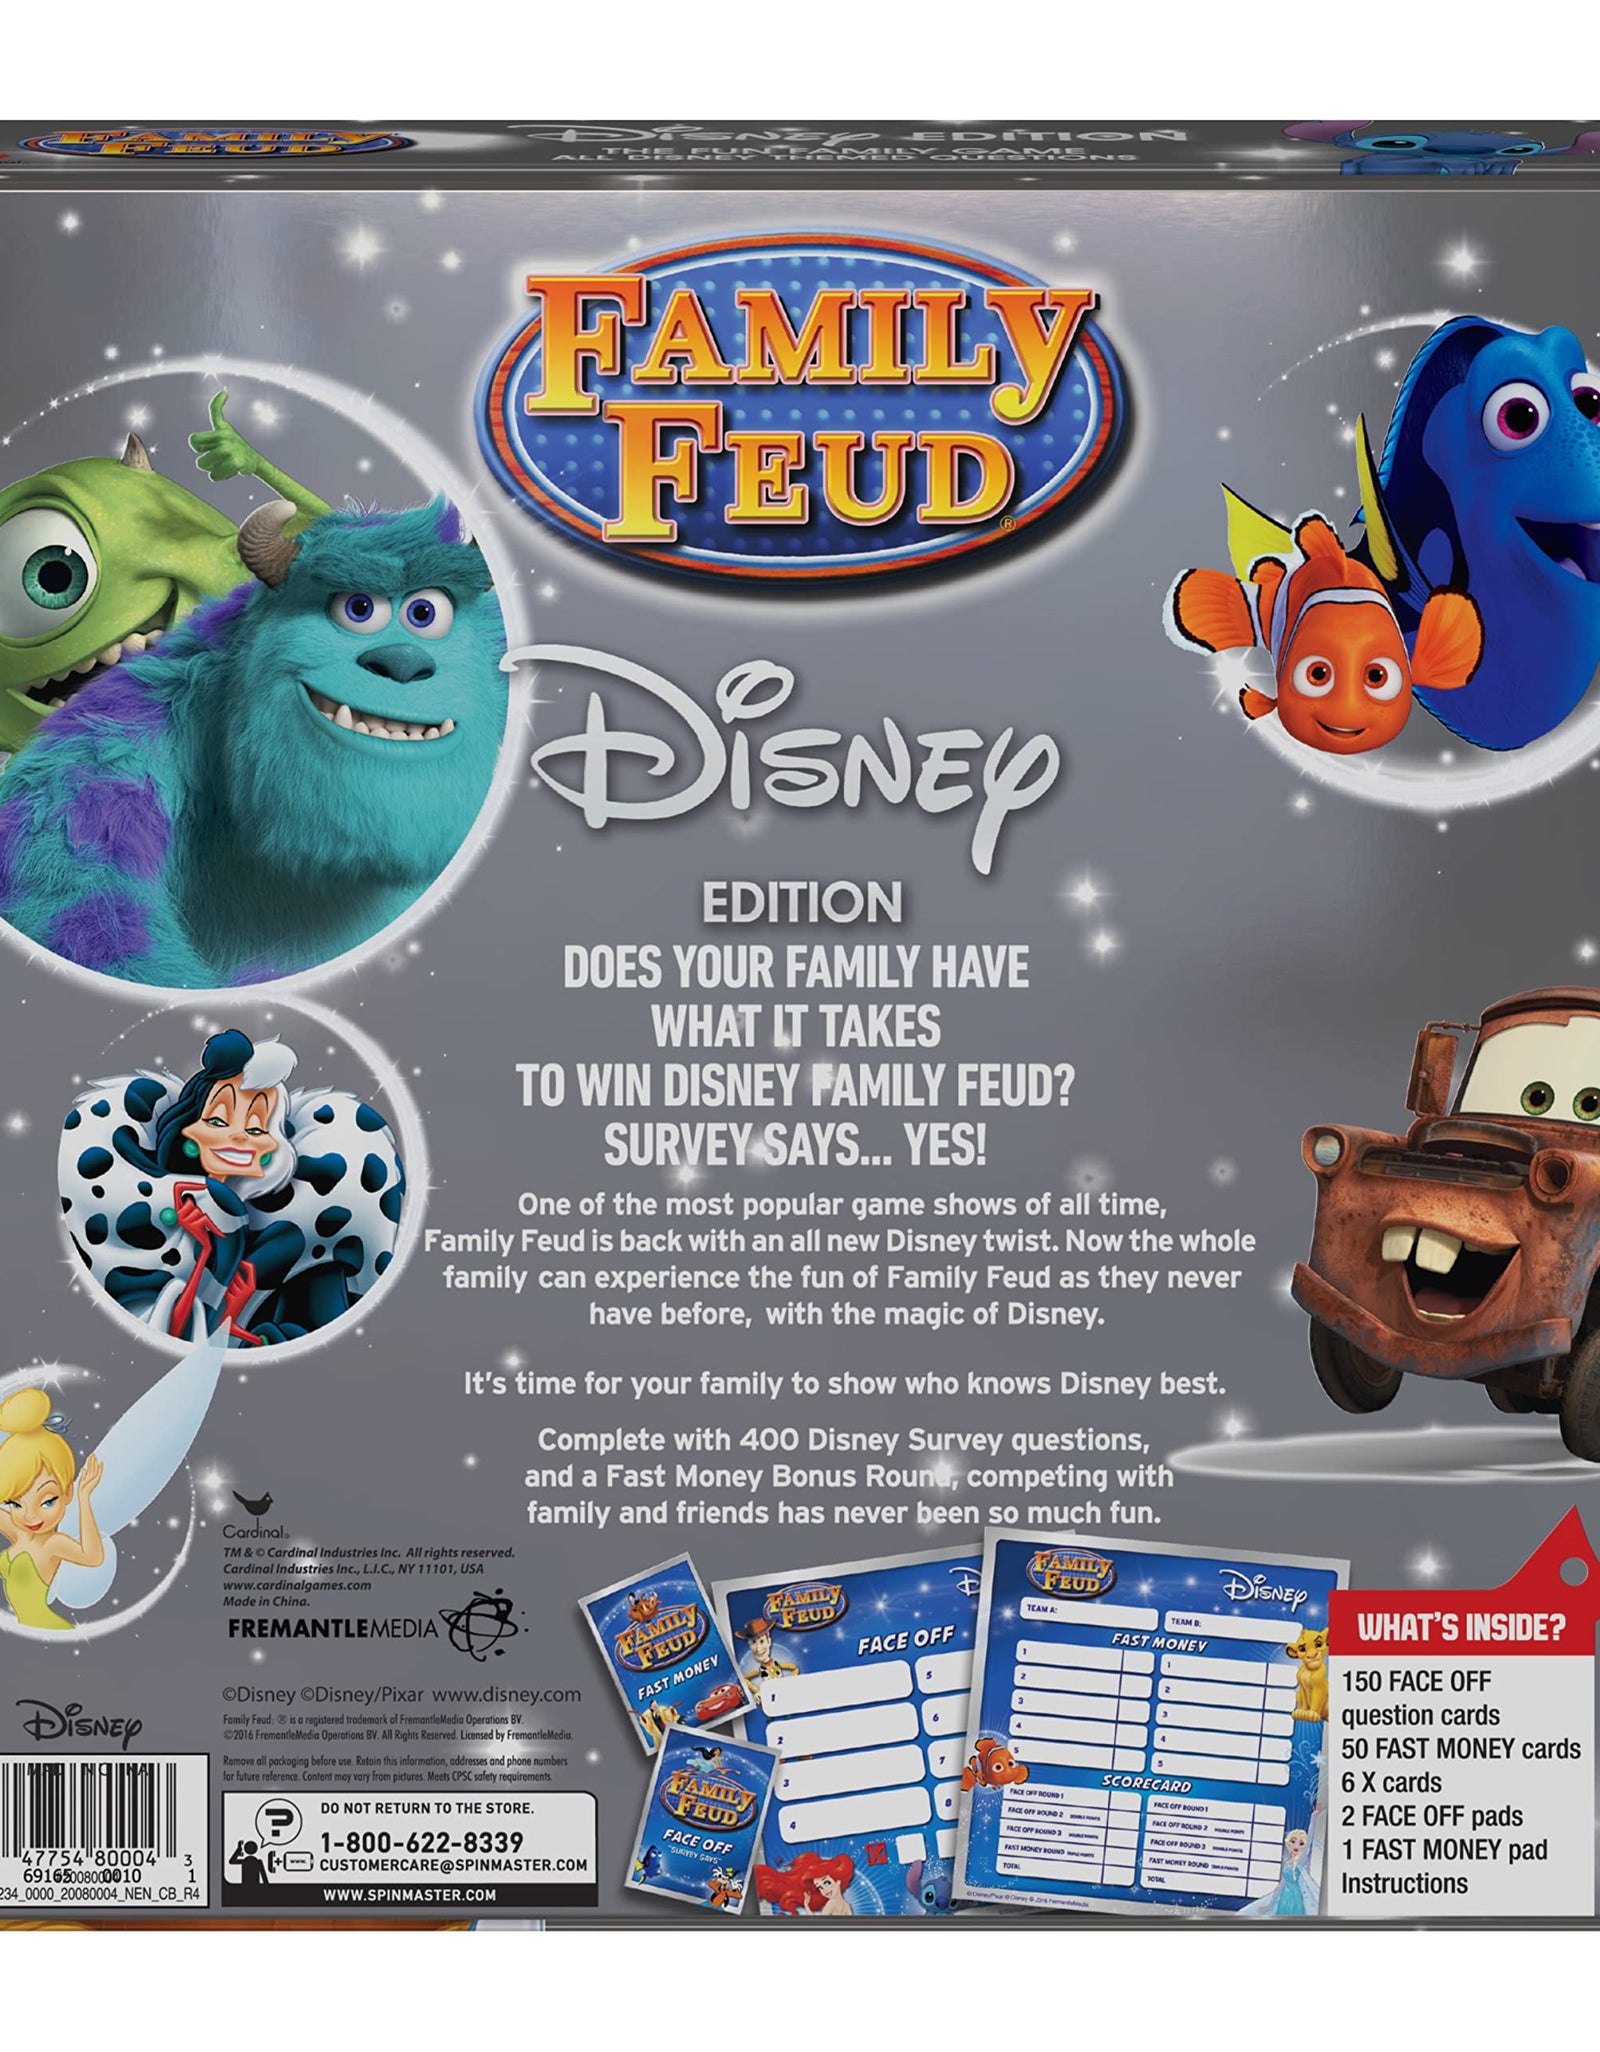 Family Feud Disney Edition Game for Adults, Families and Kids Ages 6 and up, by Spin Master